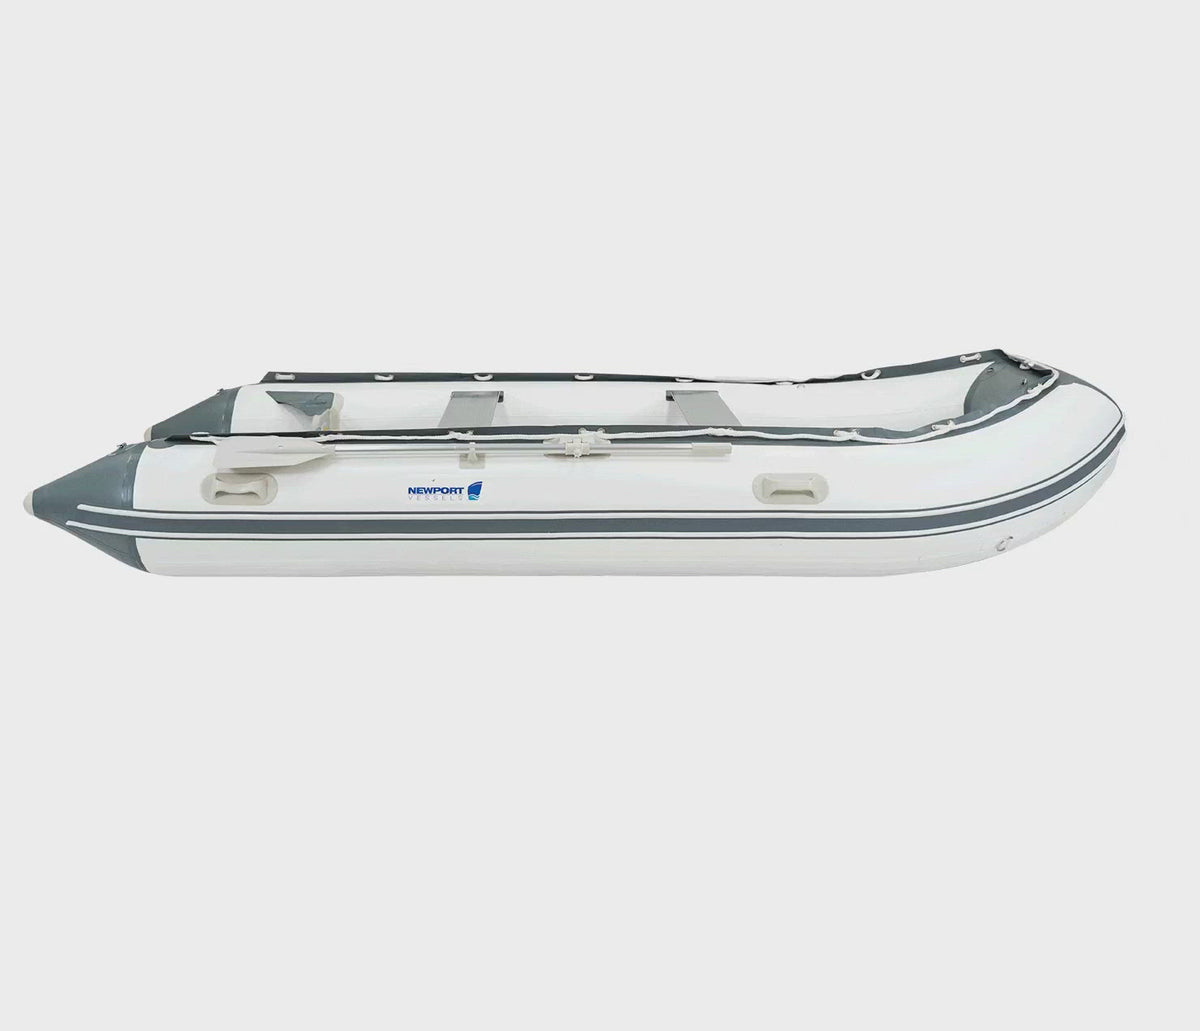 Newport Vessels Catalina Inflatable Sport Tender Dinghy Boat